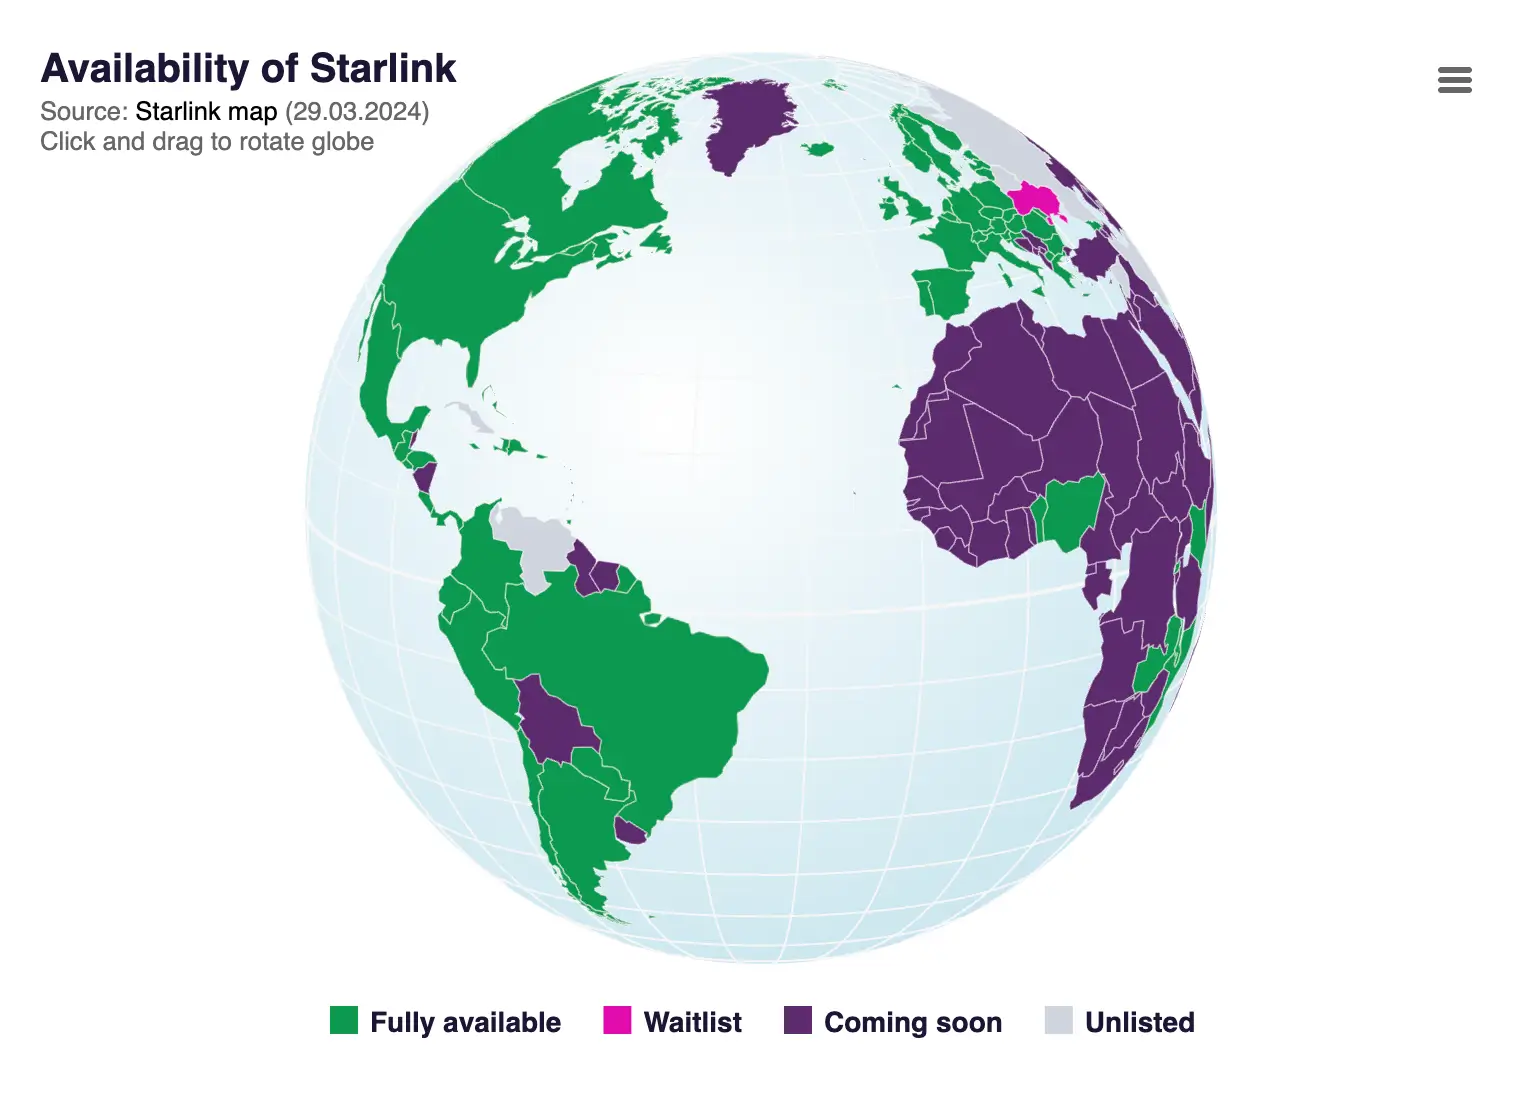 A map showing where the starlink is fully available and where it’s coming soon.